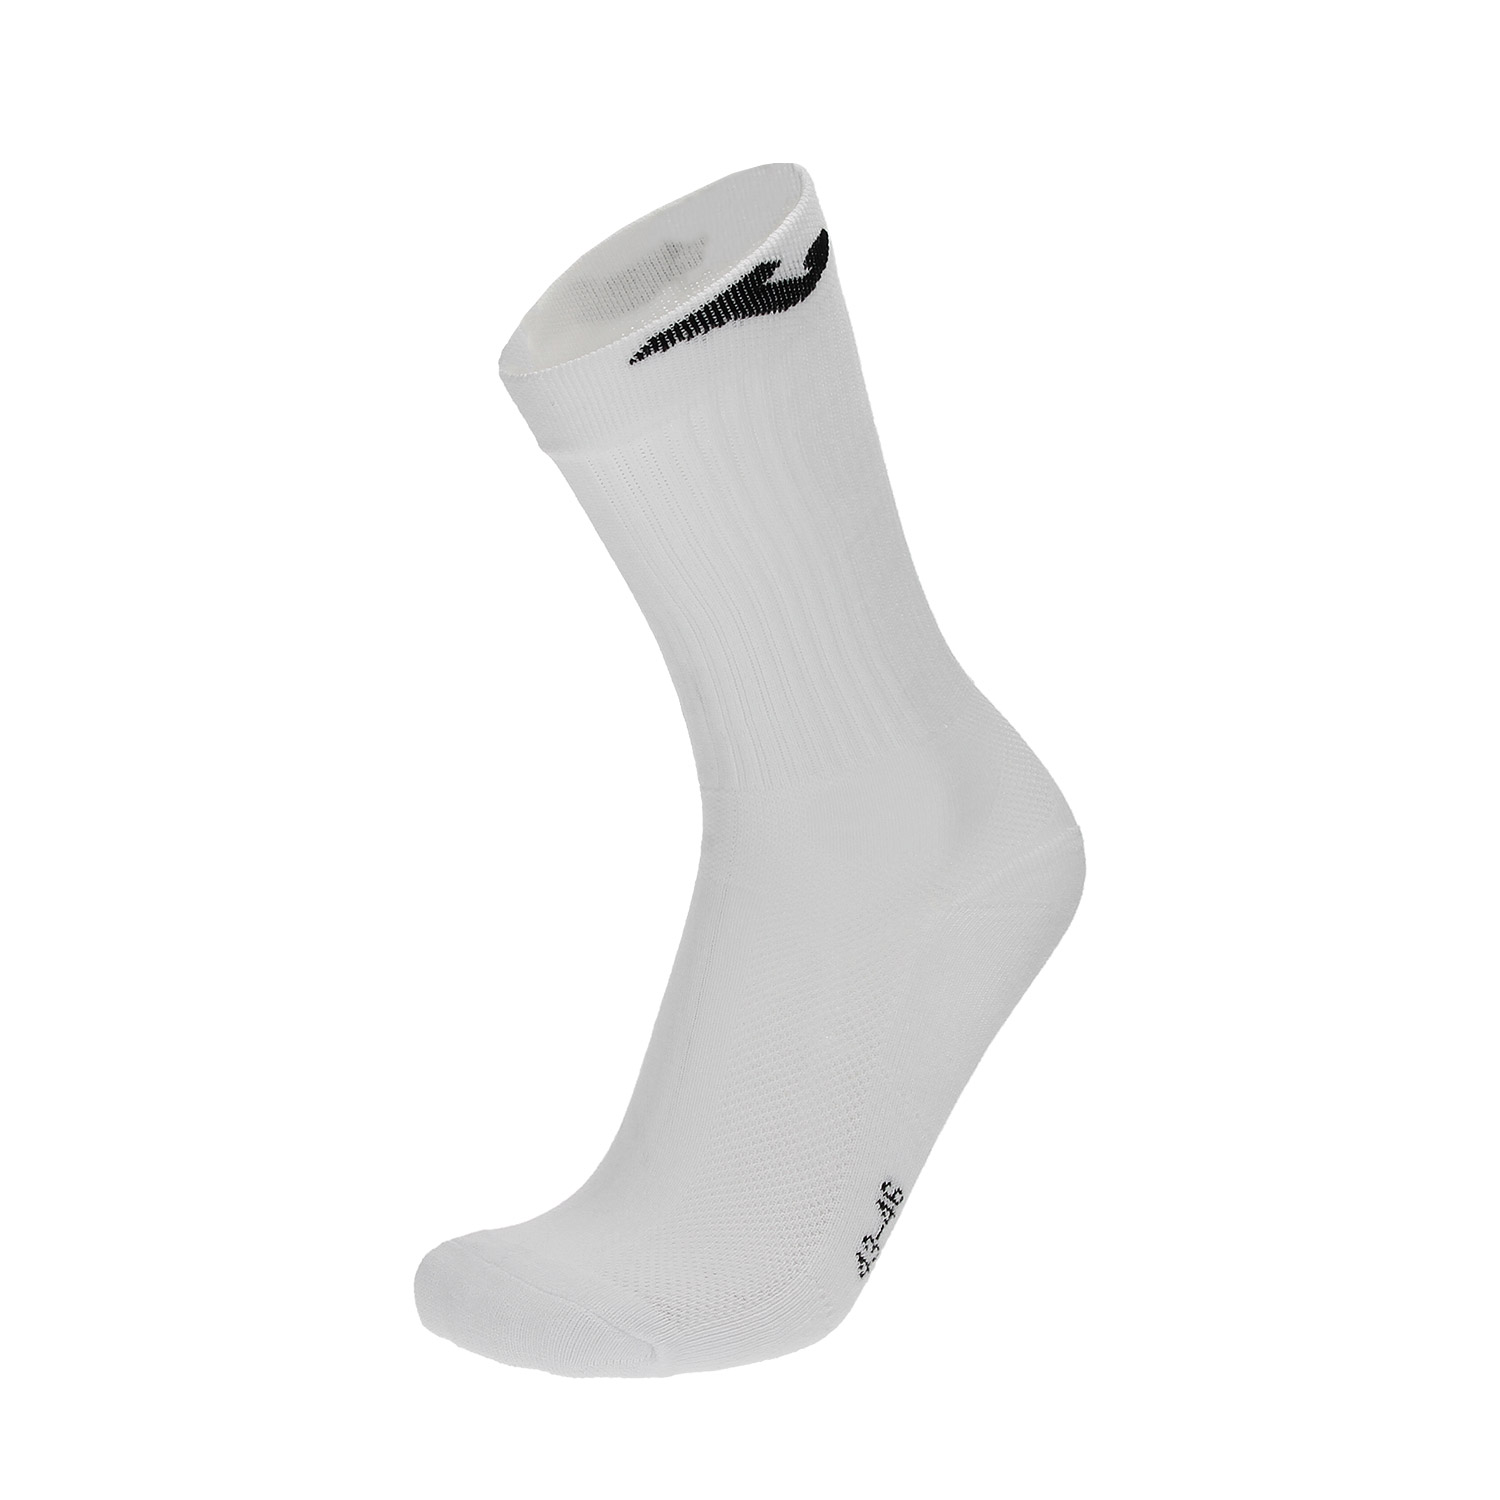 Joma Large Calcetines - White